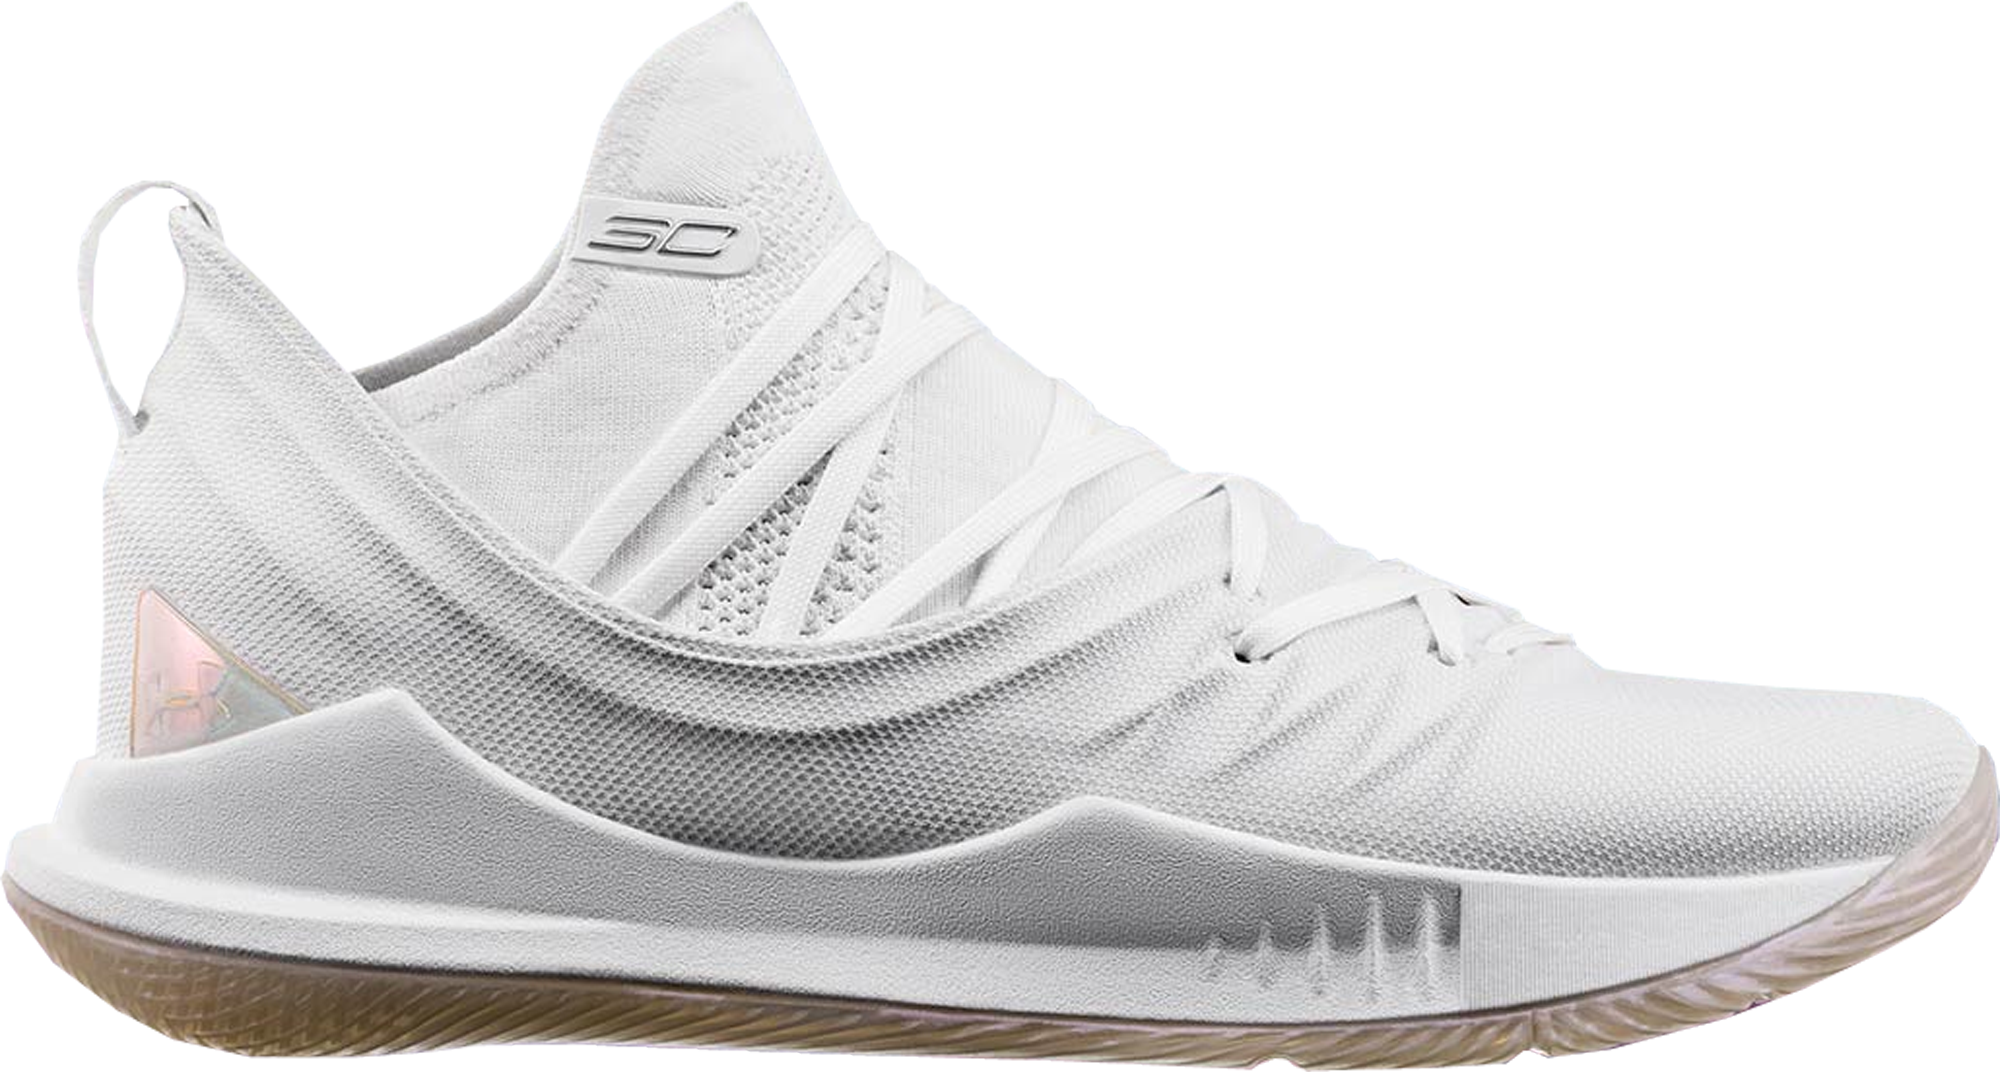 curry 5 white